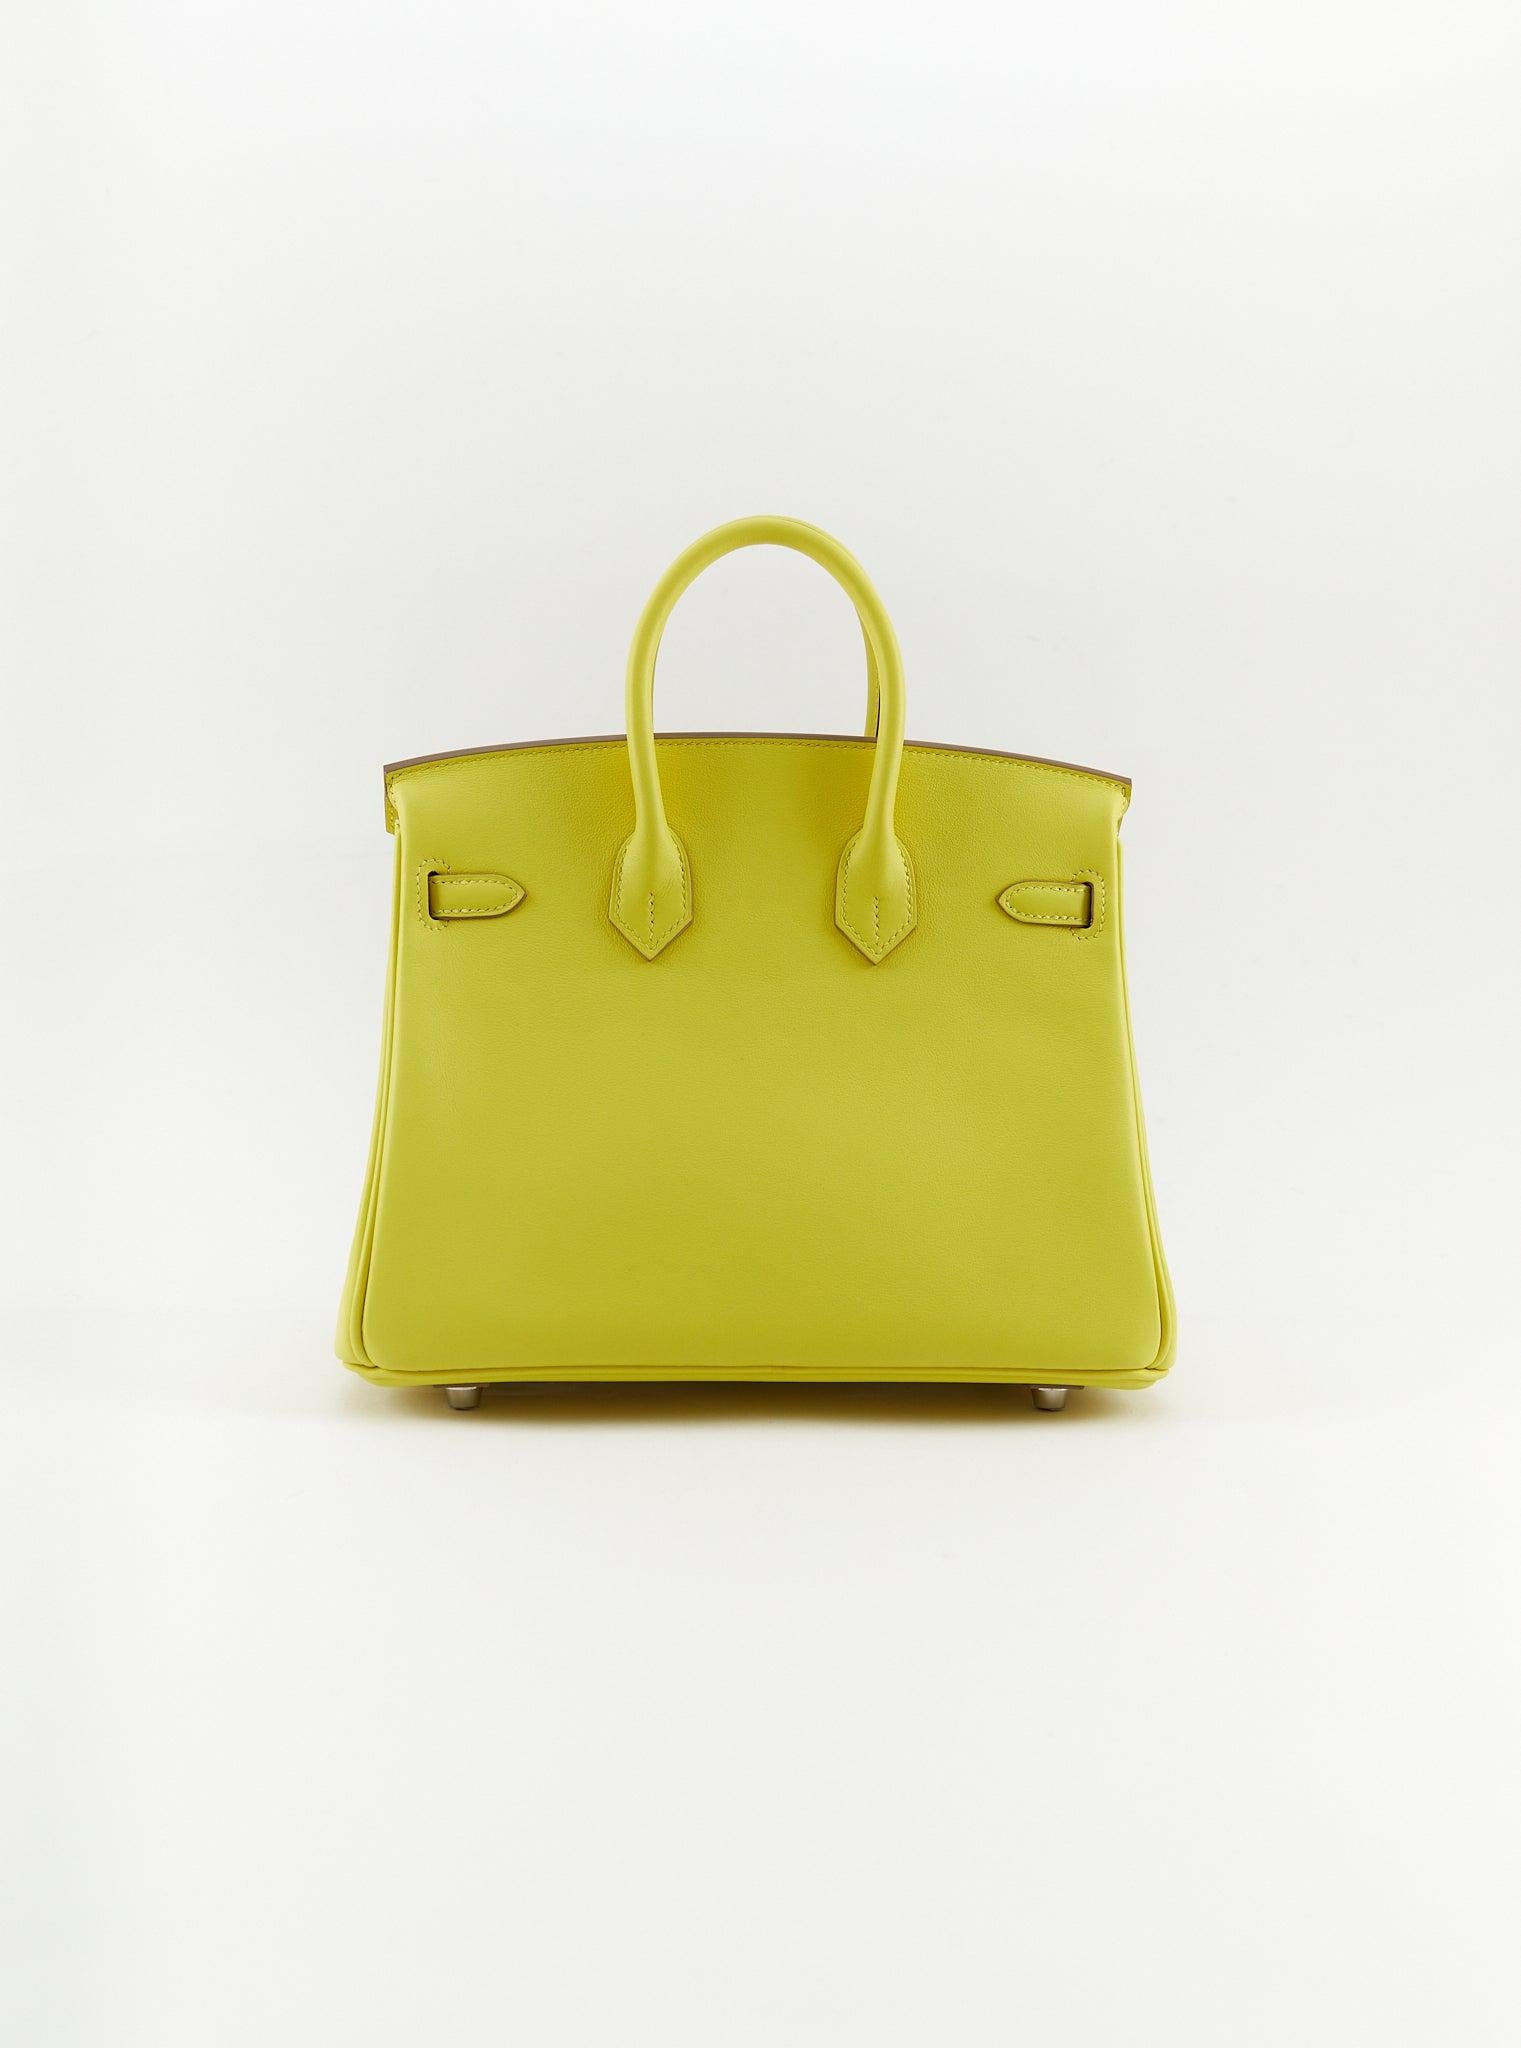 HERMÈS BIRKIN 25CM LIME Swift Leather with Palladium Hardware In Excellent Condition For Sale In London, GB